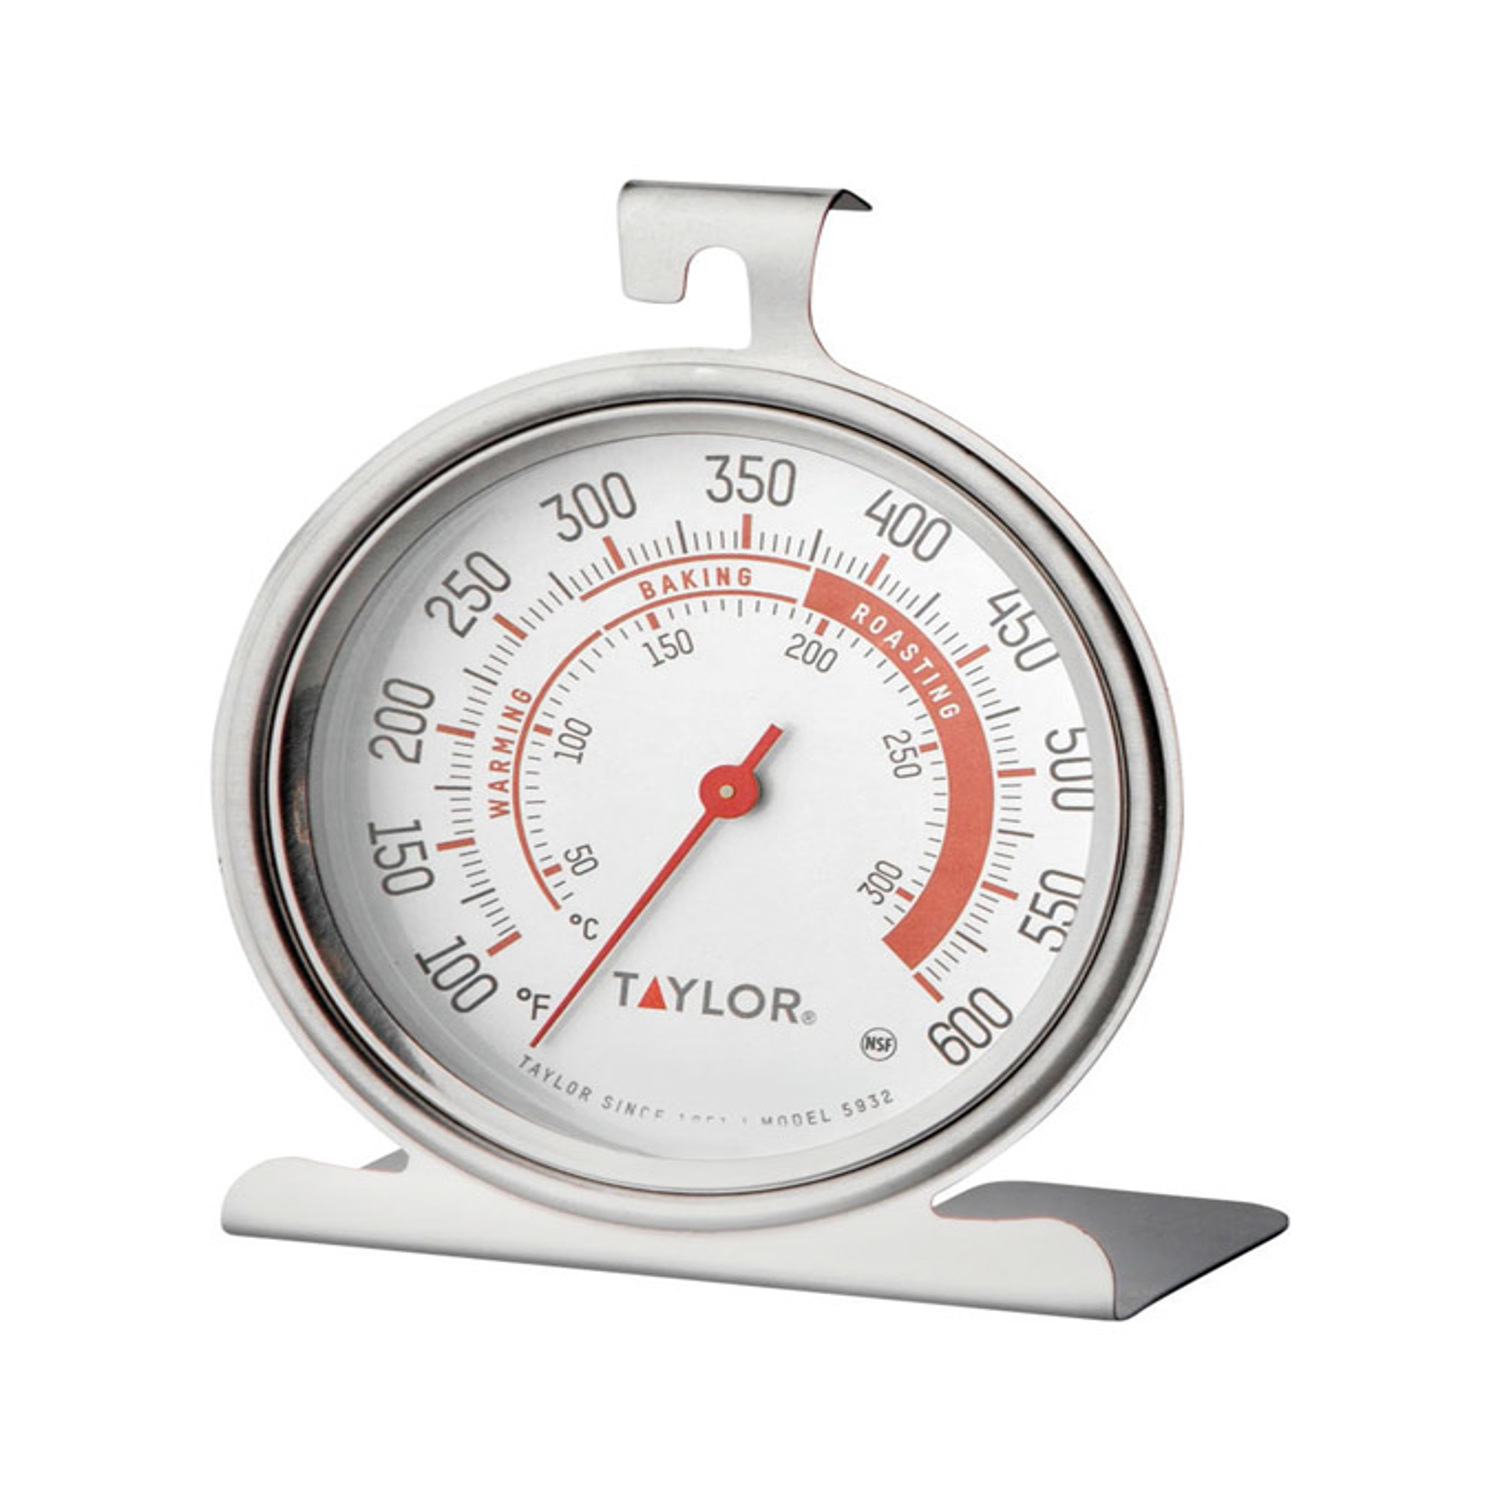 Taylor Thermometer 3Pc Set Includes 1 Super Fast Digital Thermometer and 2  Leave-in Oven-Safe Analog Meat Thermometers